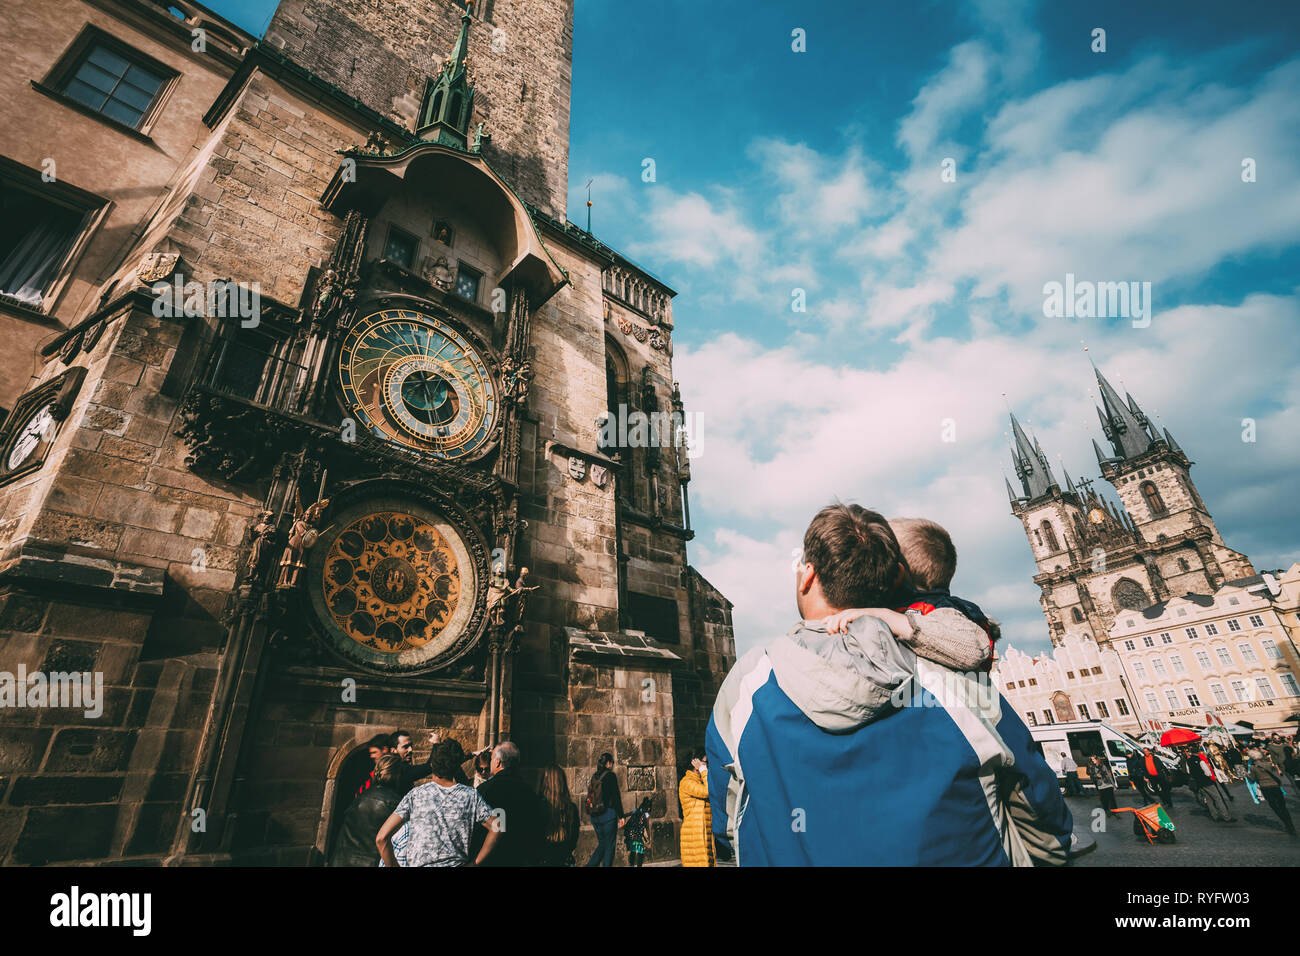 PRAGUE, CZECH REPUBLIC - OCTOBER 9, 2014: The unrecognizable man and boy are looking at astronomical clock in Prague. Tower of town hall with astronom Stock Photo